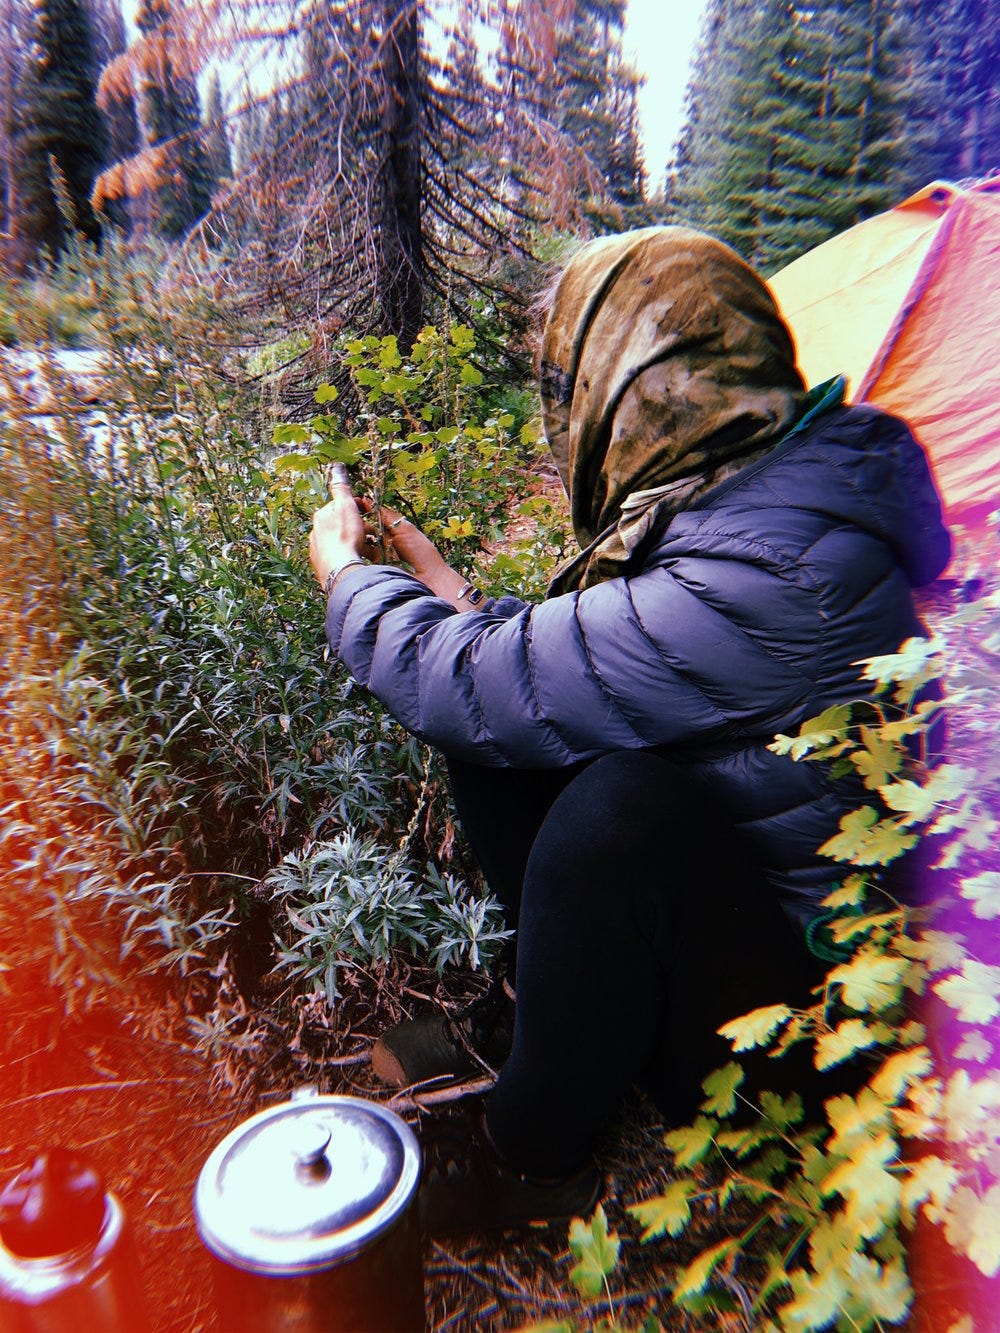 Erin with Mugwort at our first campsite.